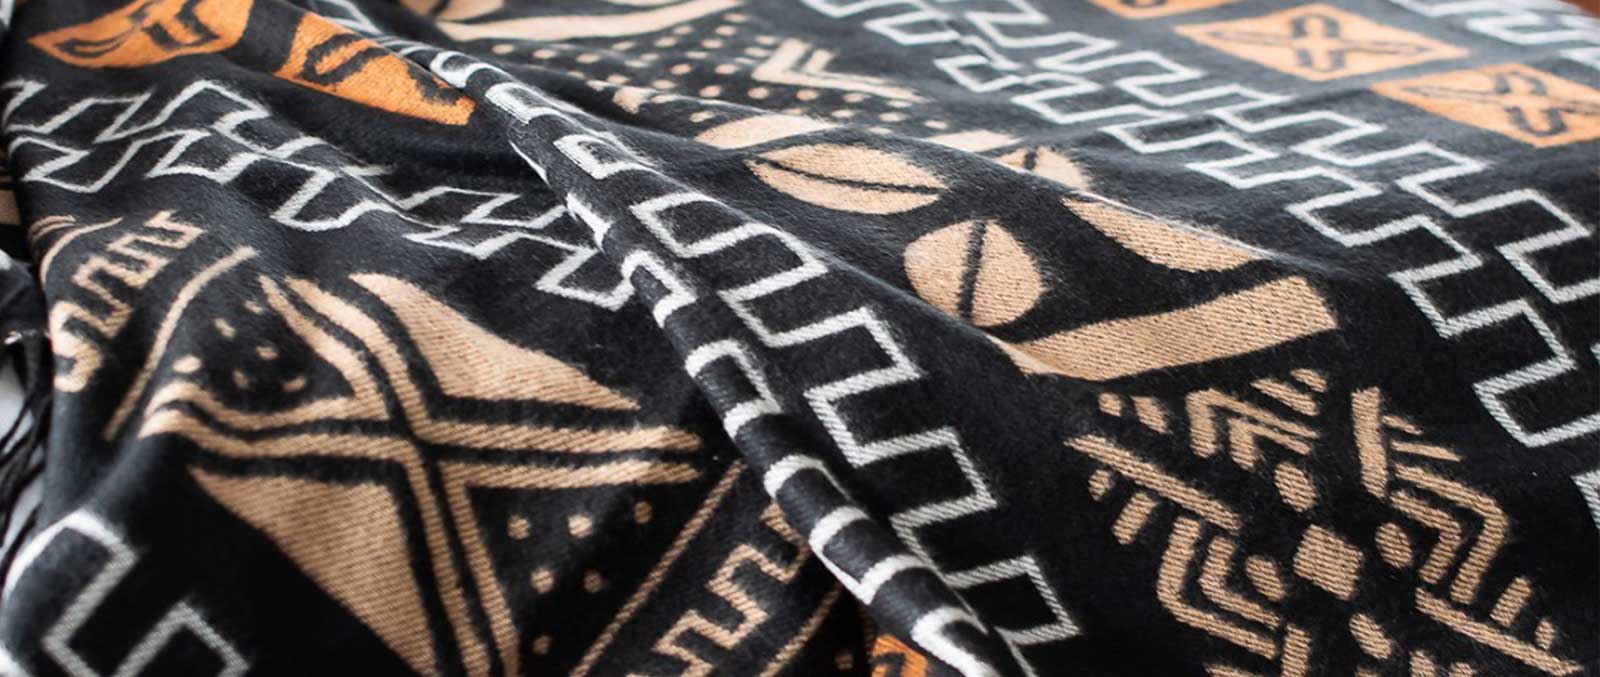 Patterned African Throws